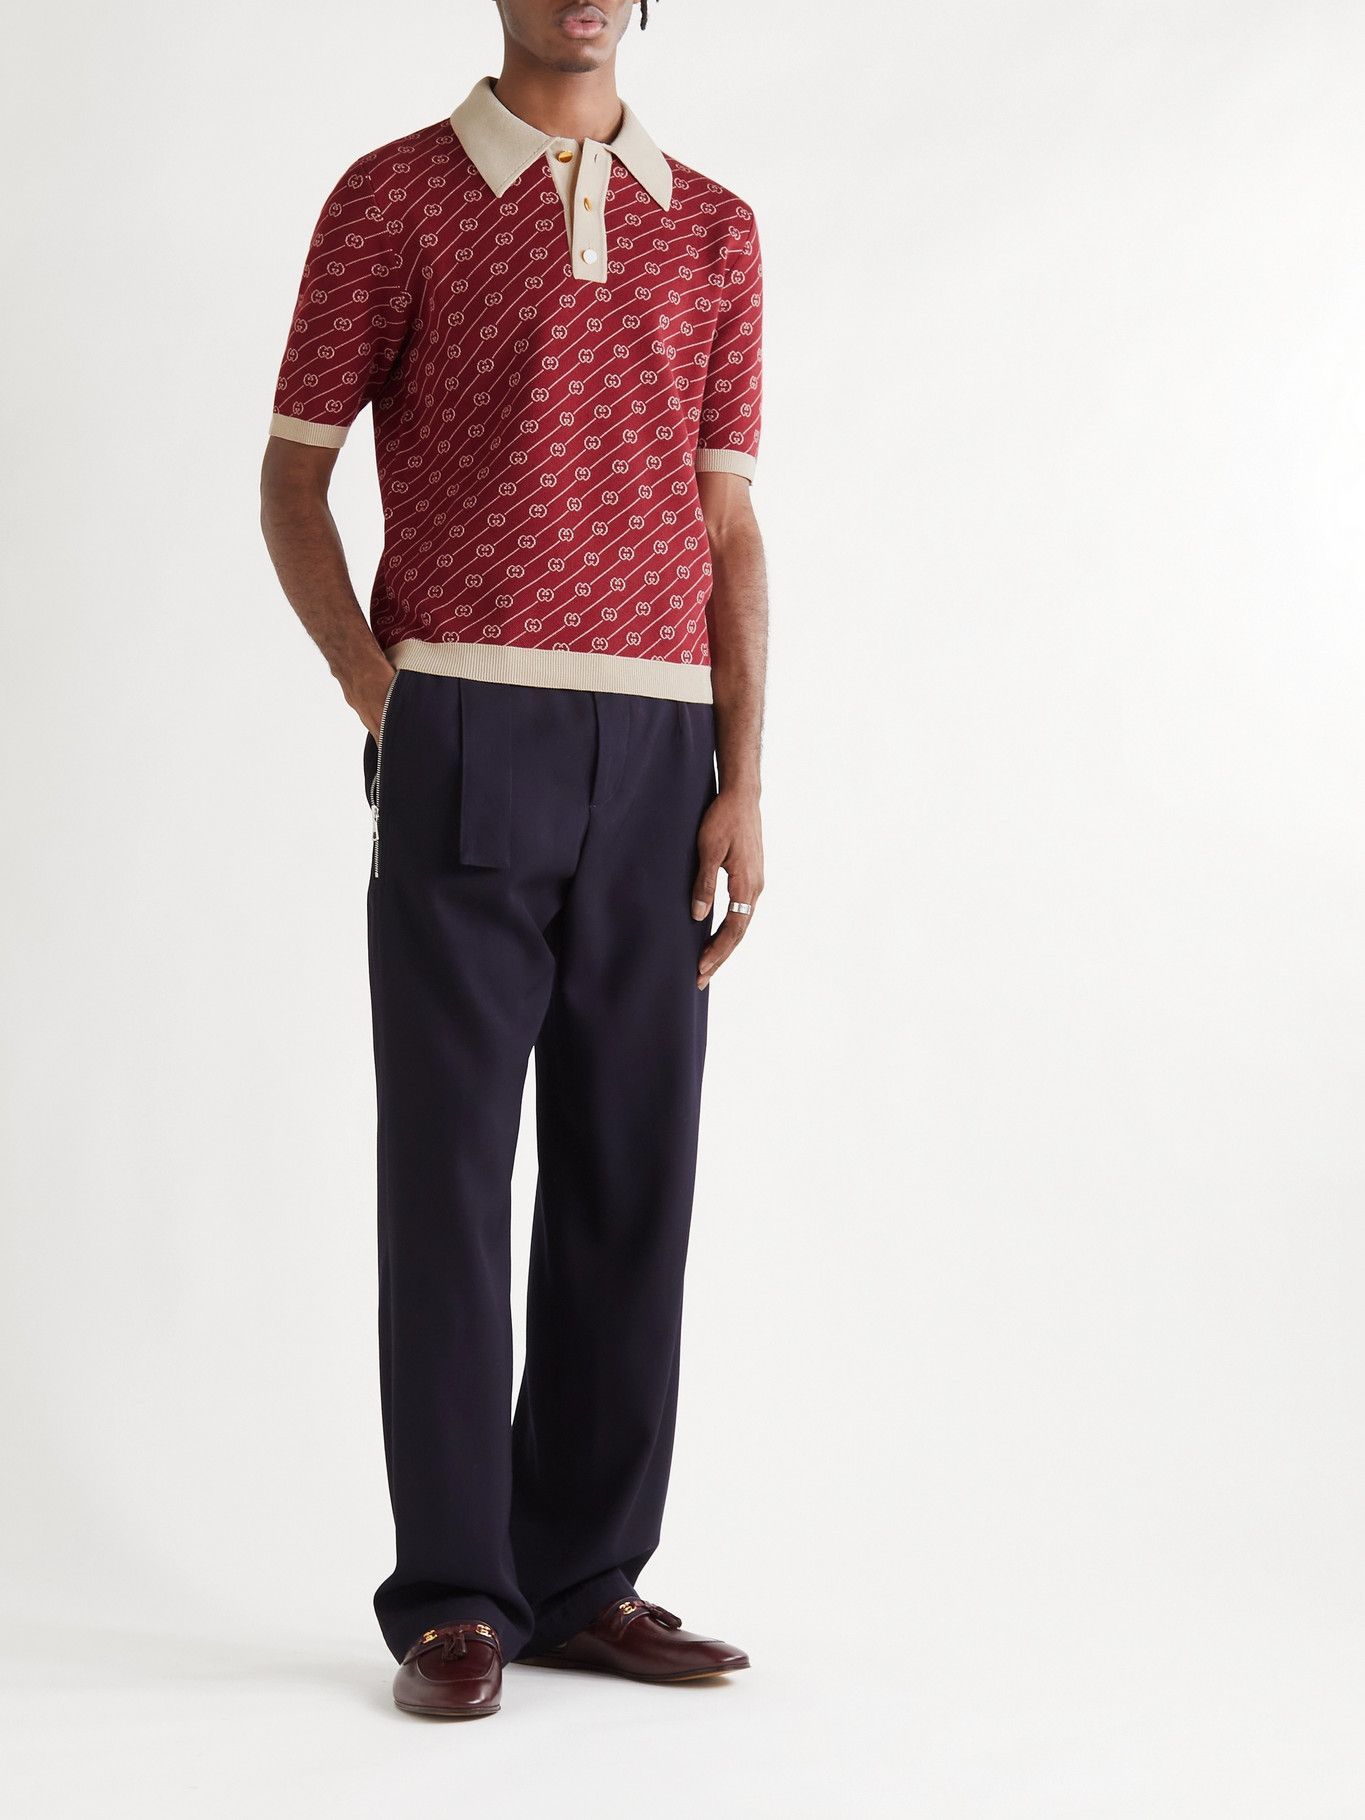 GUCCI - Slim-Fit Logo-Jacquard Cotton and Silk-Blend Polo Shirt - Red Gucci